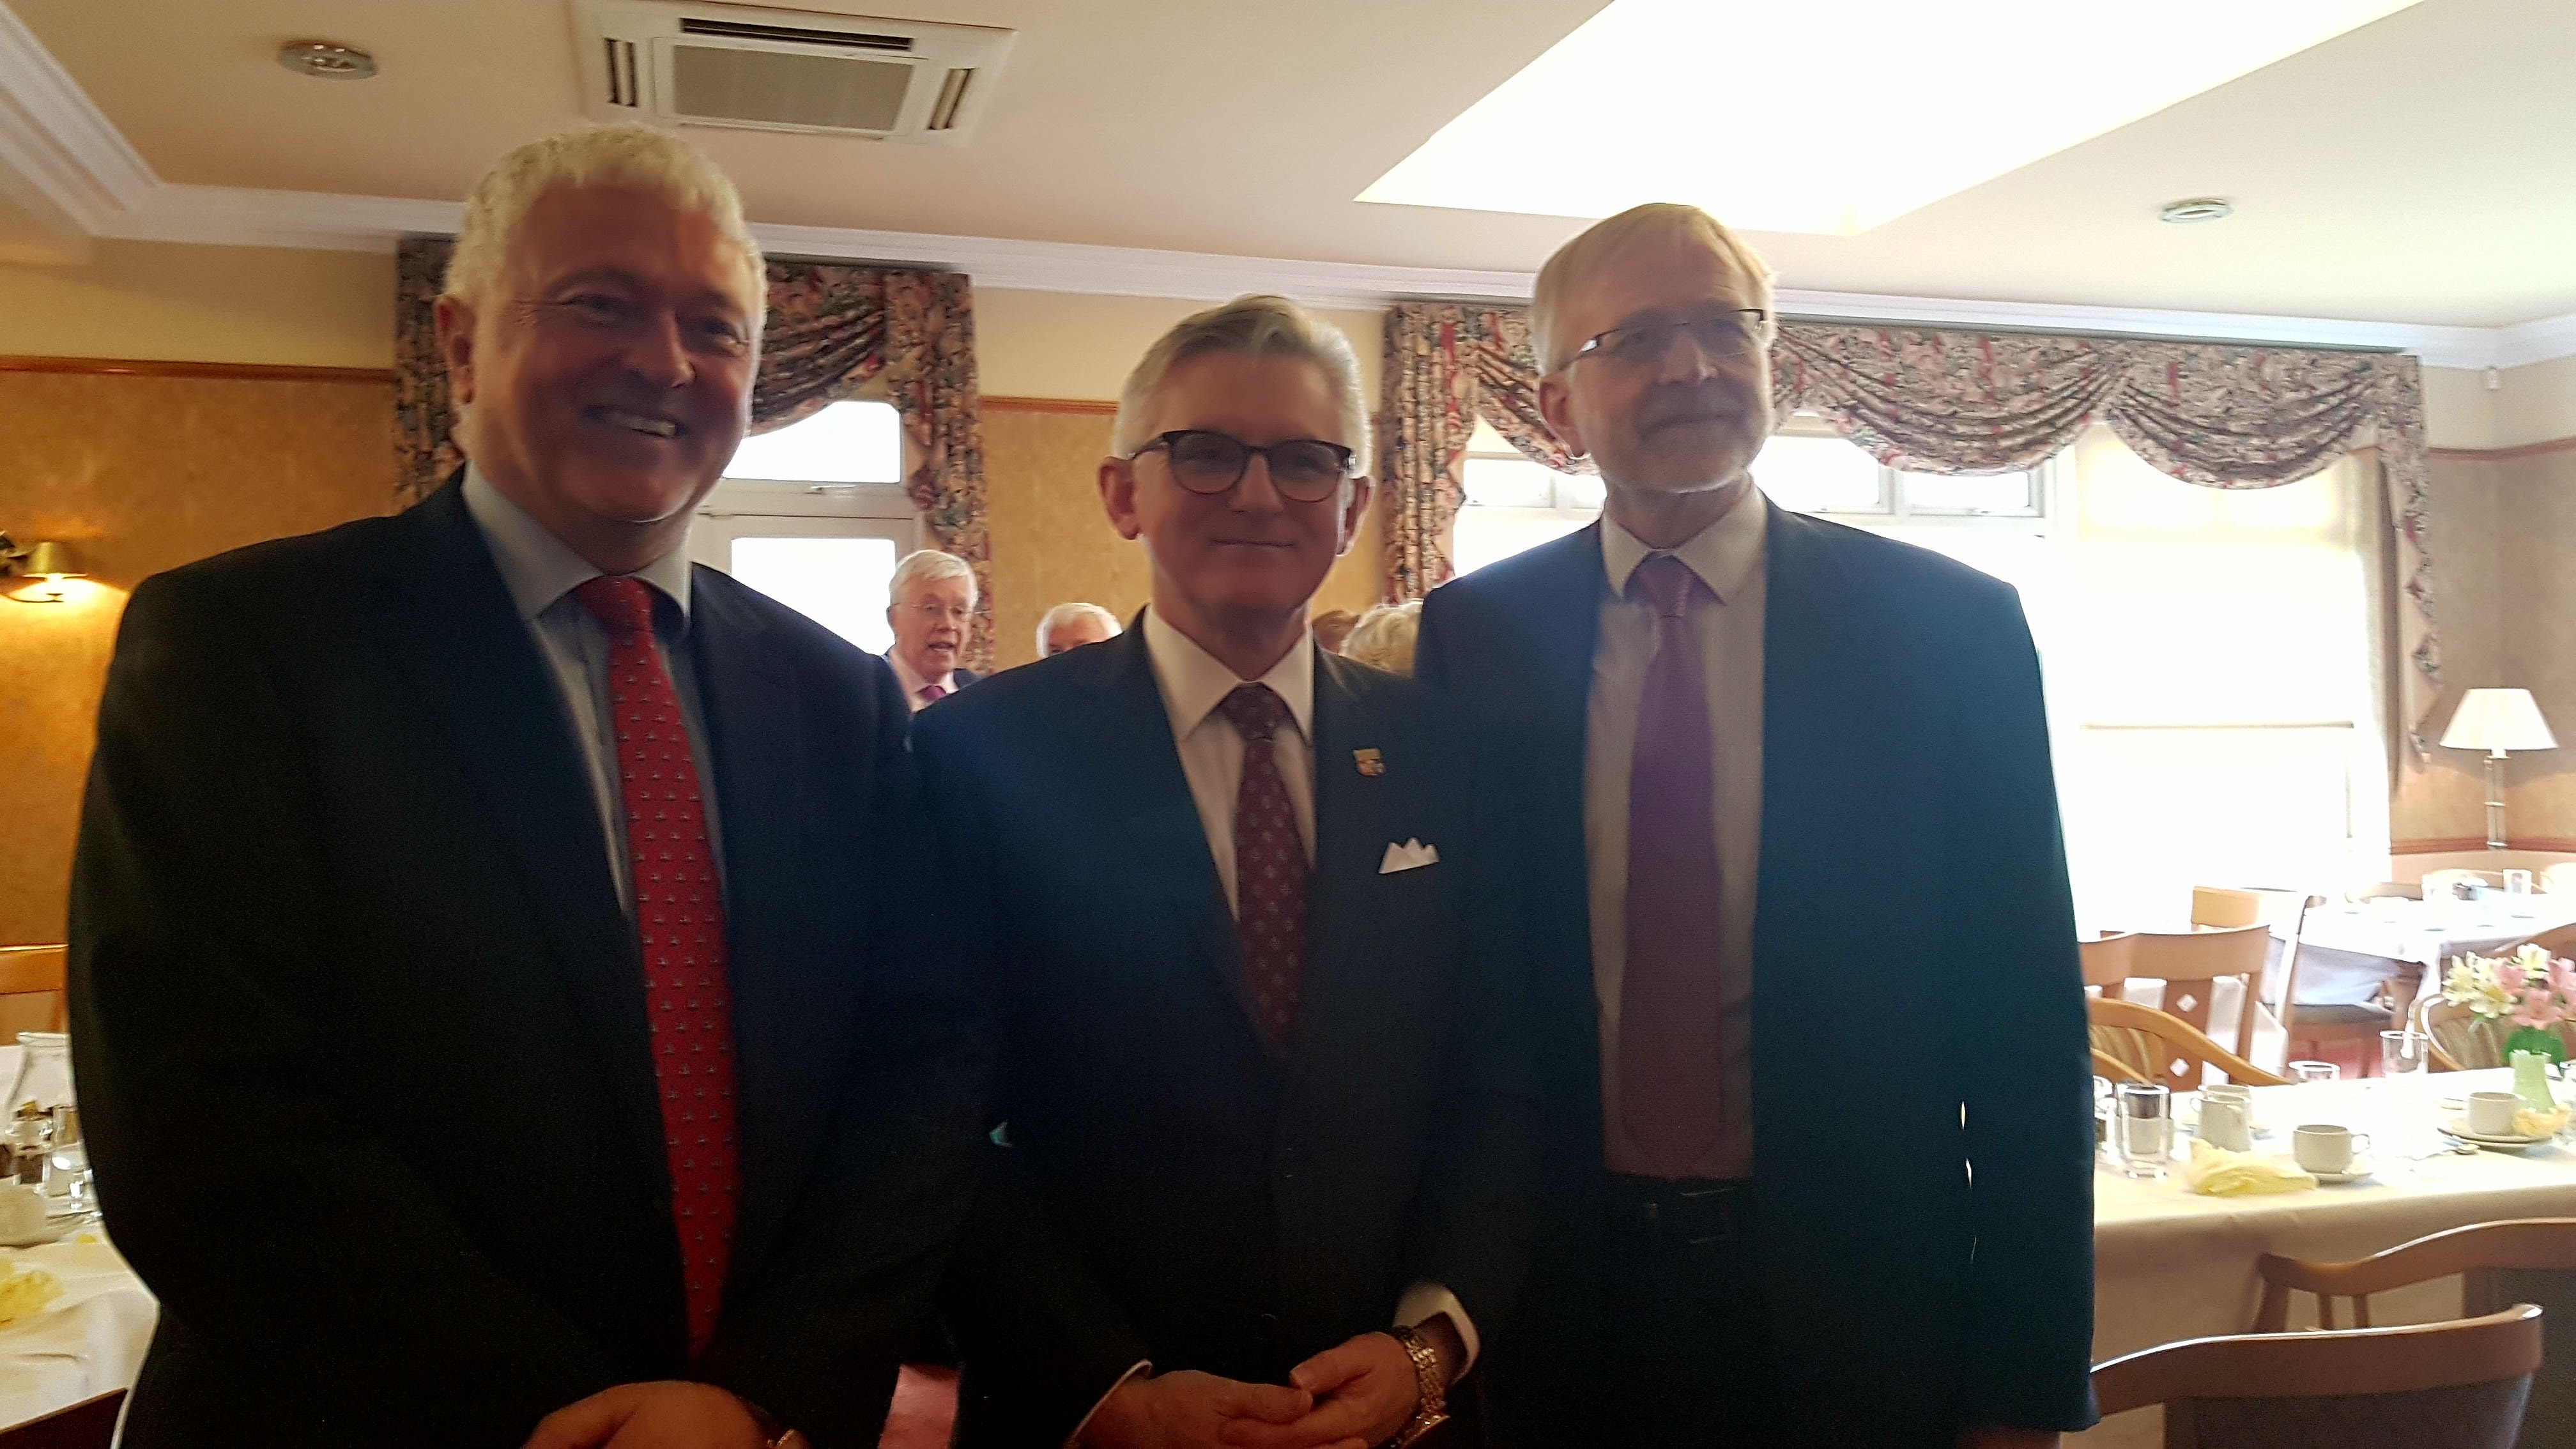 Pictured L-R: Joe Aherne, CEO Leading Edge Group; Professor Patrick O'Shea, UCC President and Dr. Seamus O'Tuama, Director Adult Continuing Education, UCC.